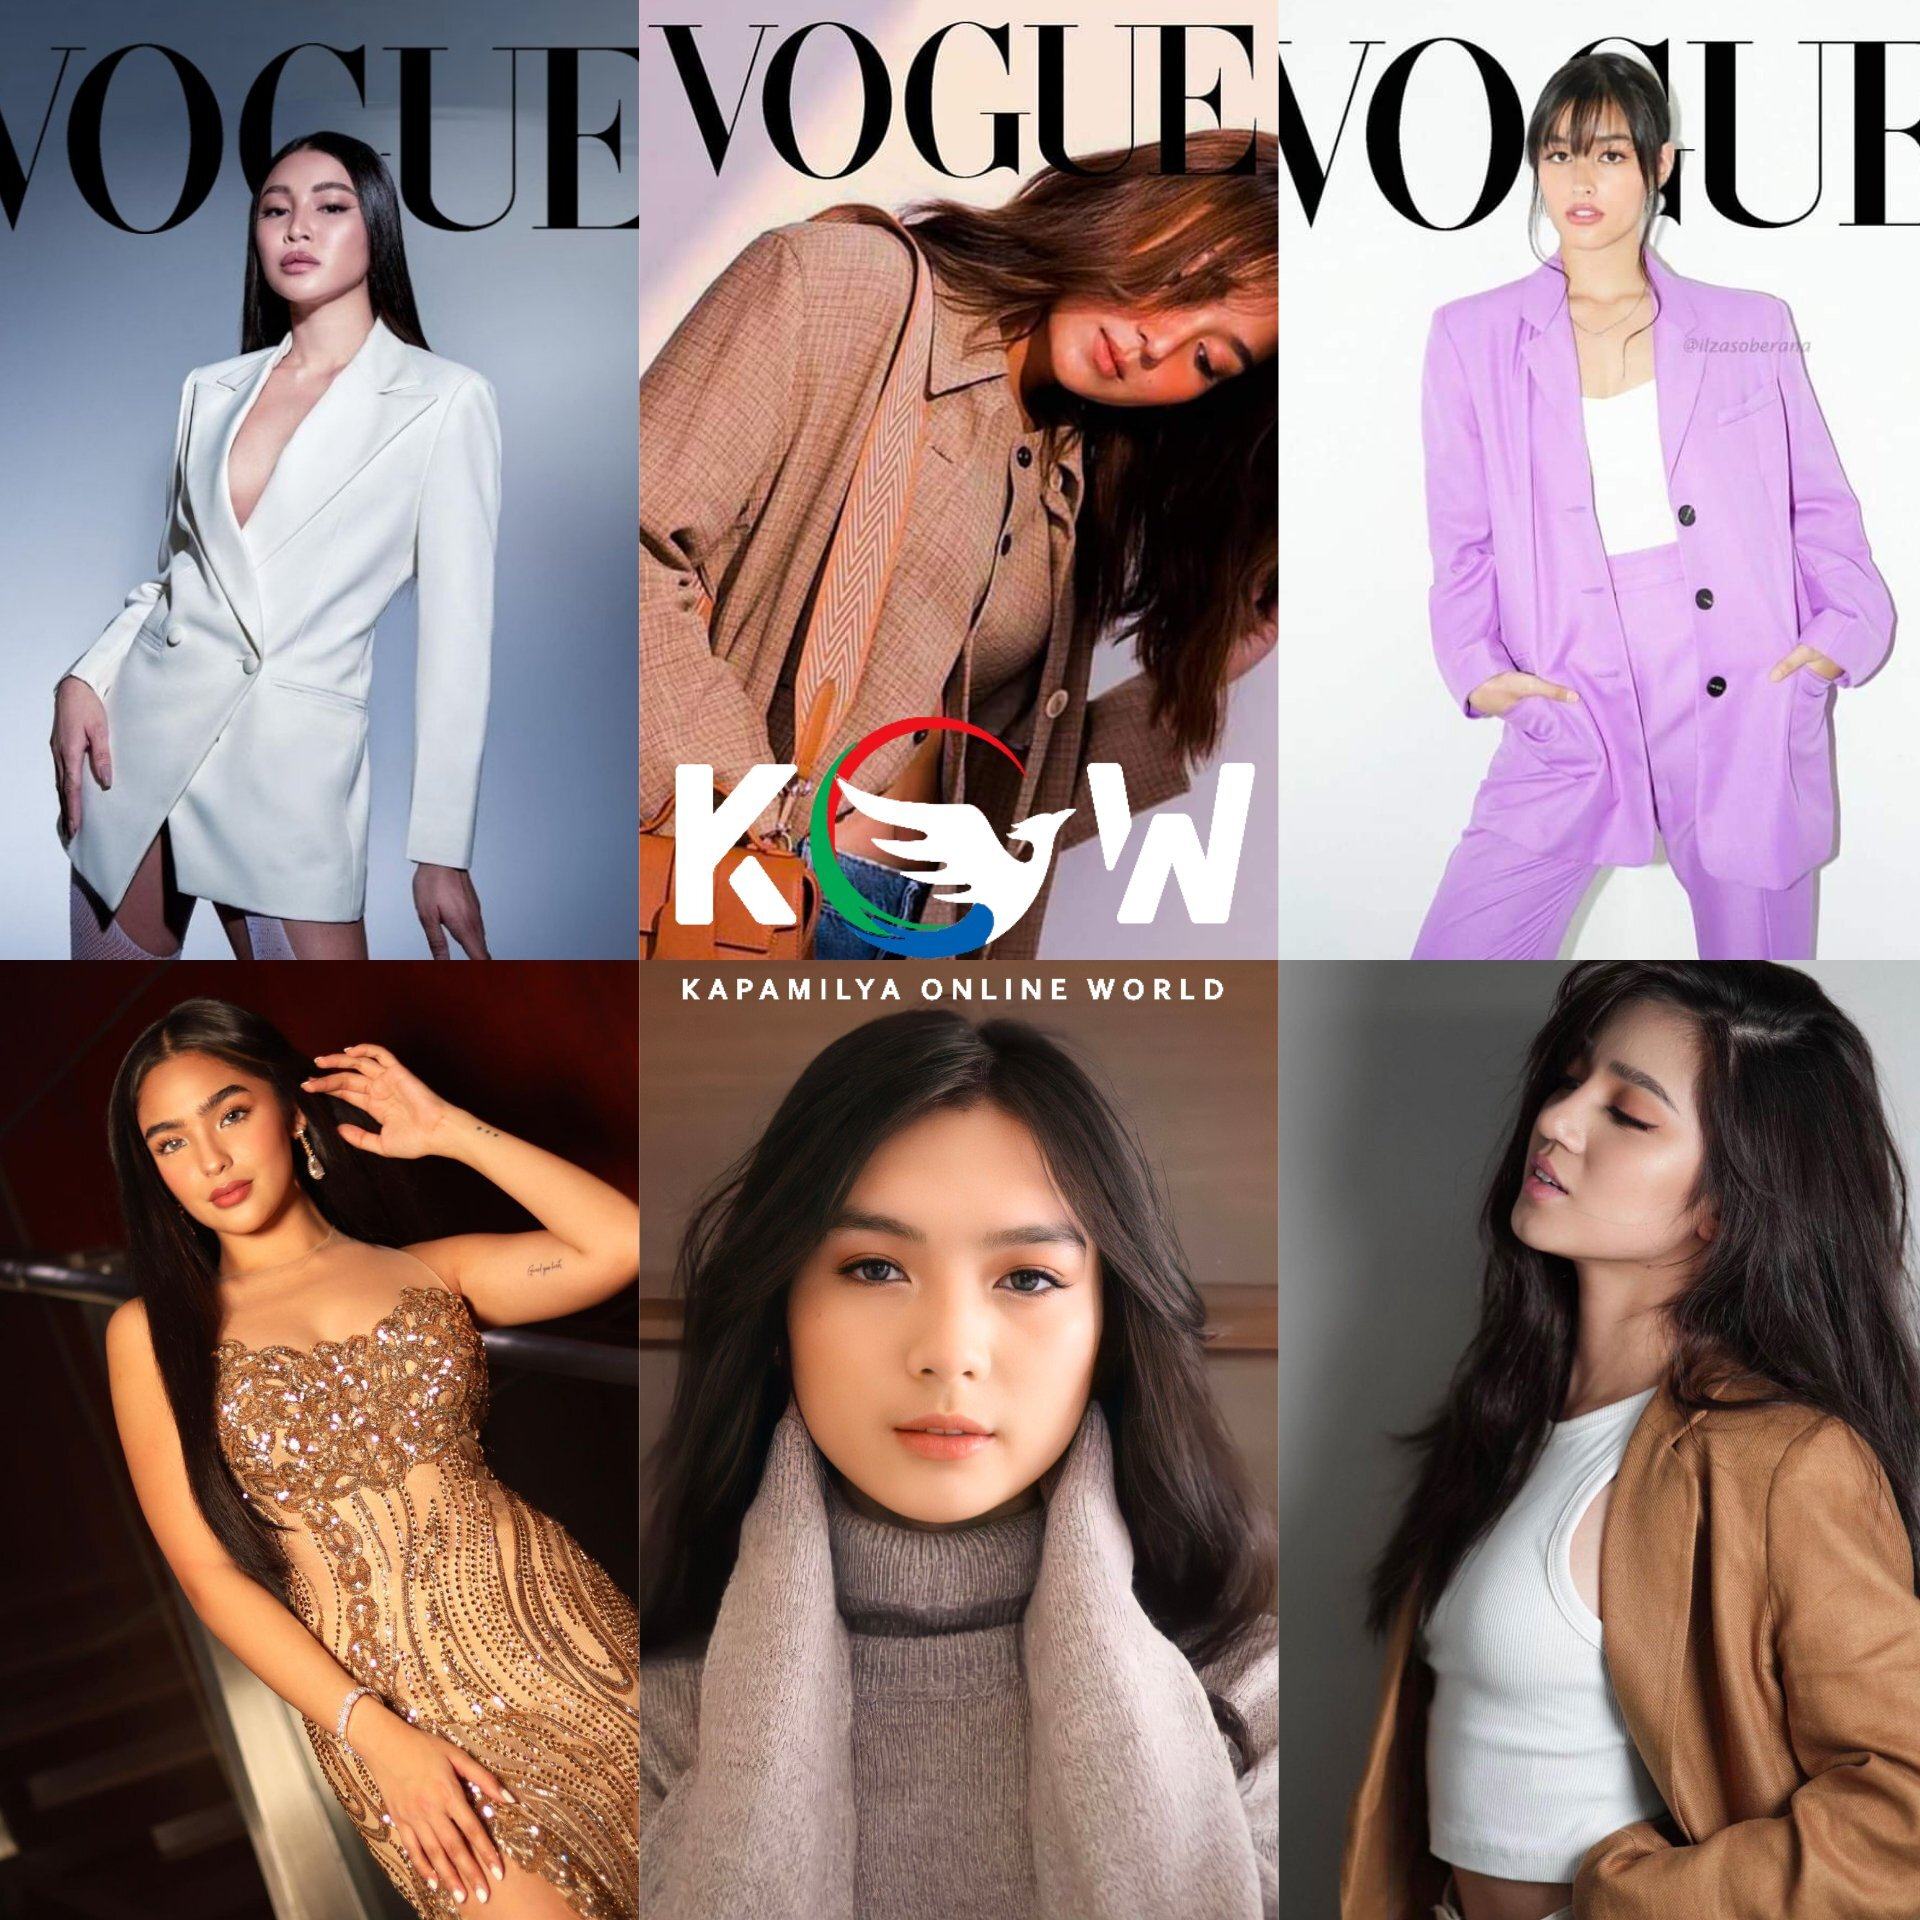 Fans’ impressions of how Vogue Philippines might look. Photo: Twitter